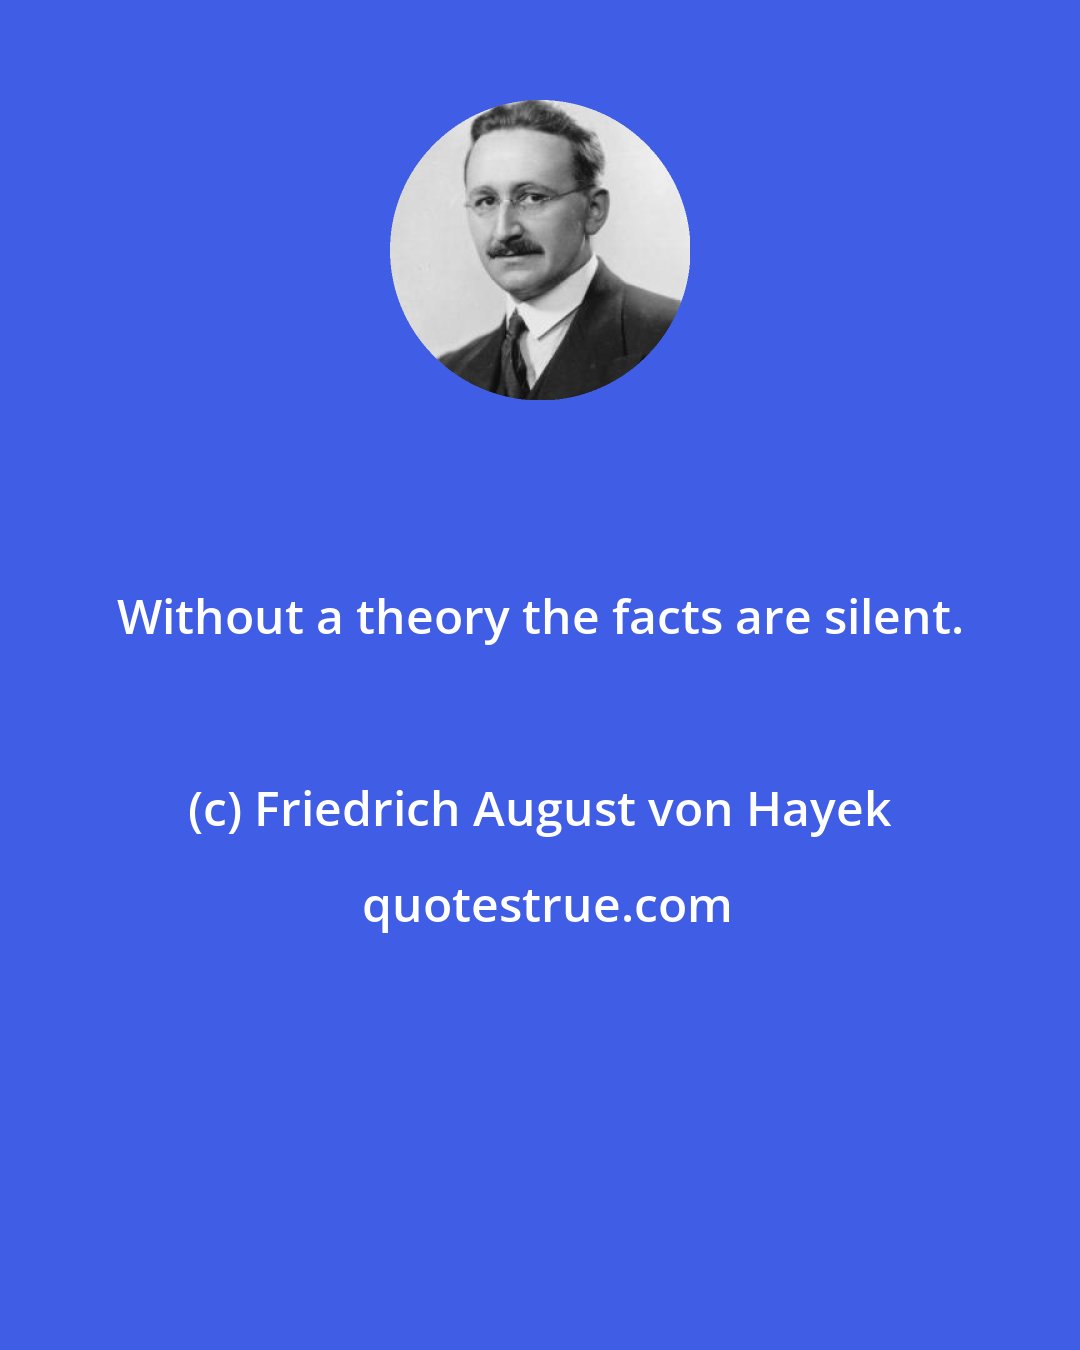 Friedrich August von Hayek: Without a theory the facts are silent.